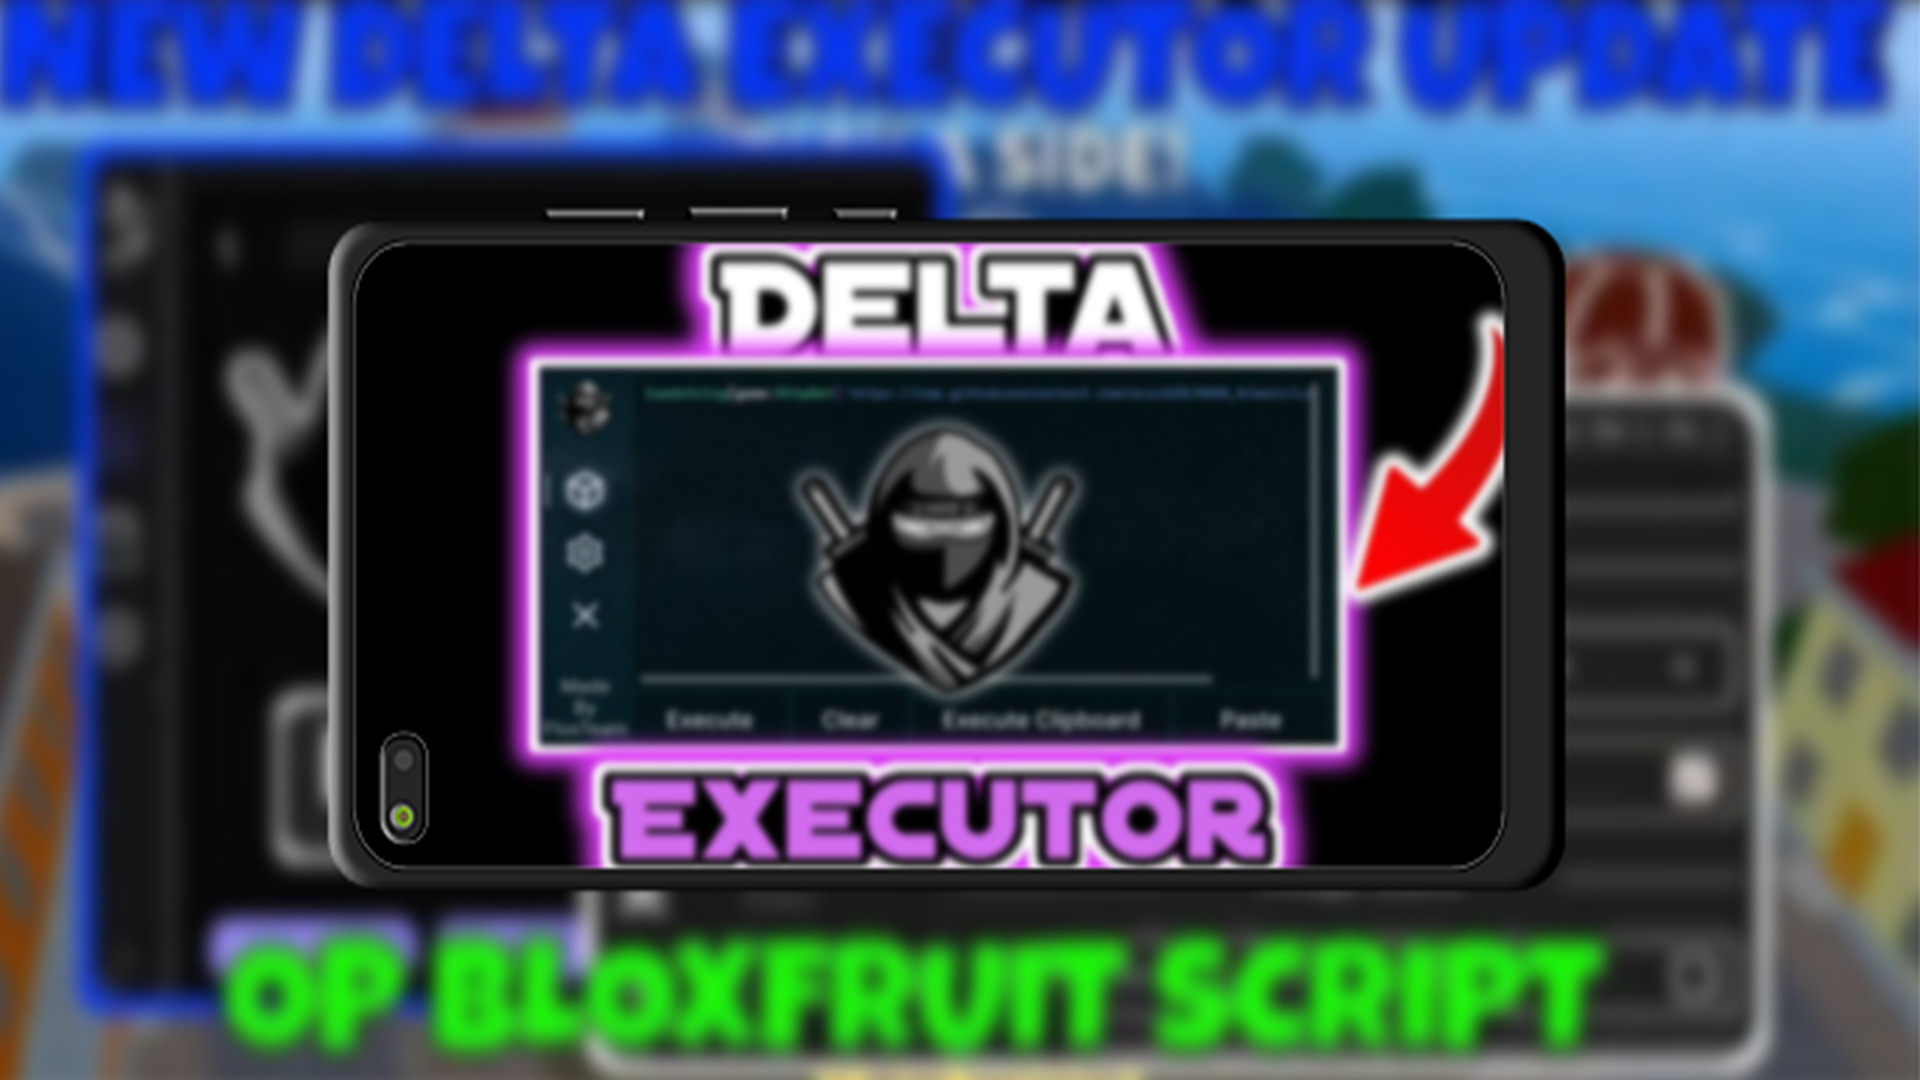 How to Install Delta Executor Mobile December